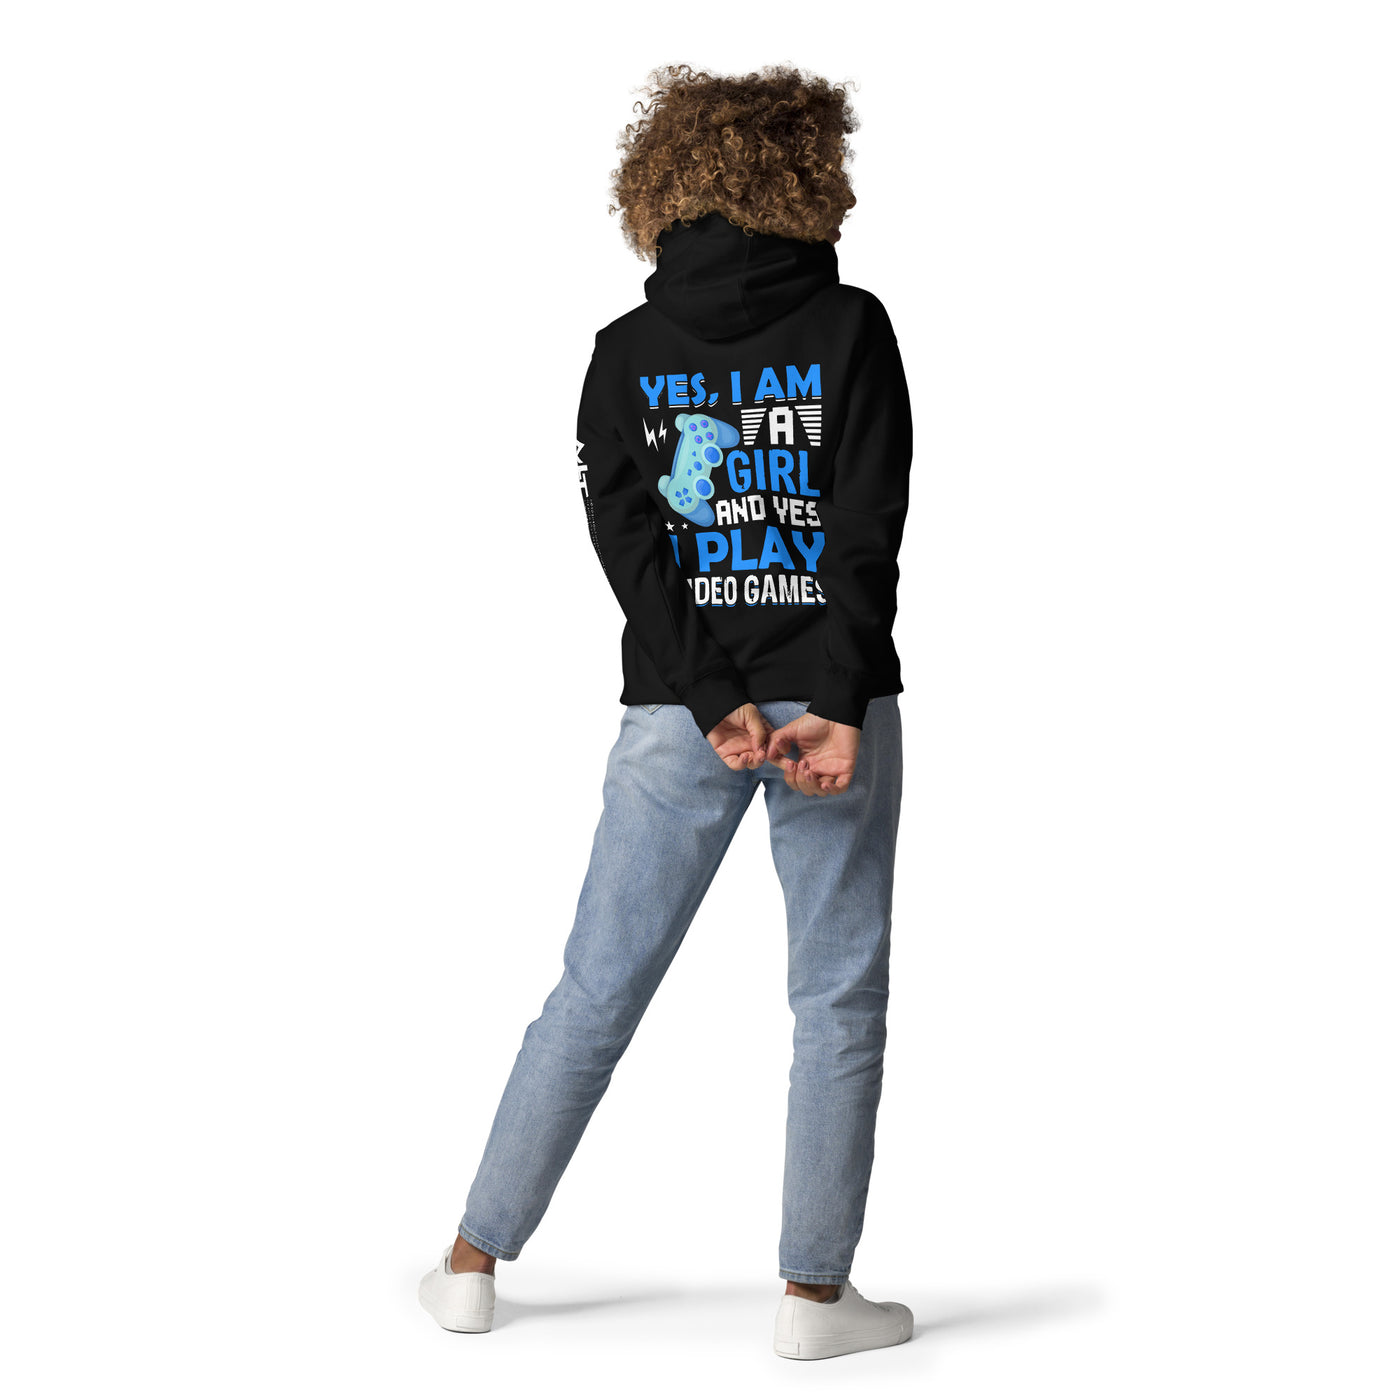 Yes, I am a Girl. Yes! I play Videogame Unisex Hoodie ( Back Print )